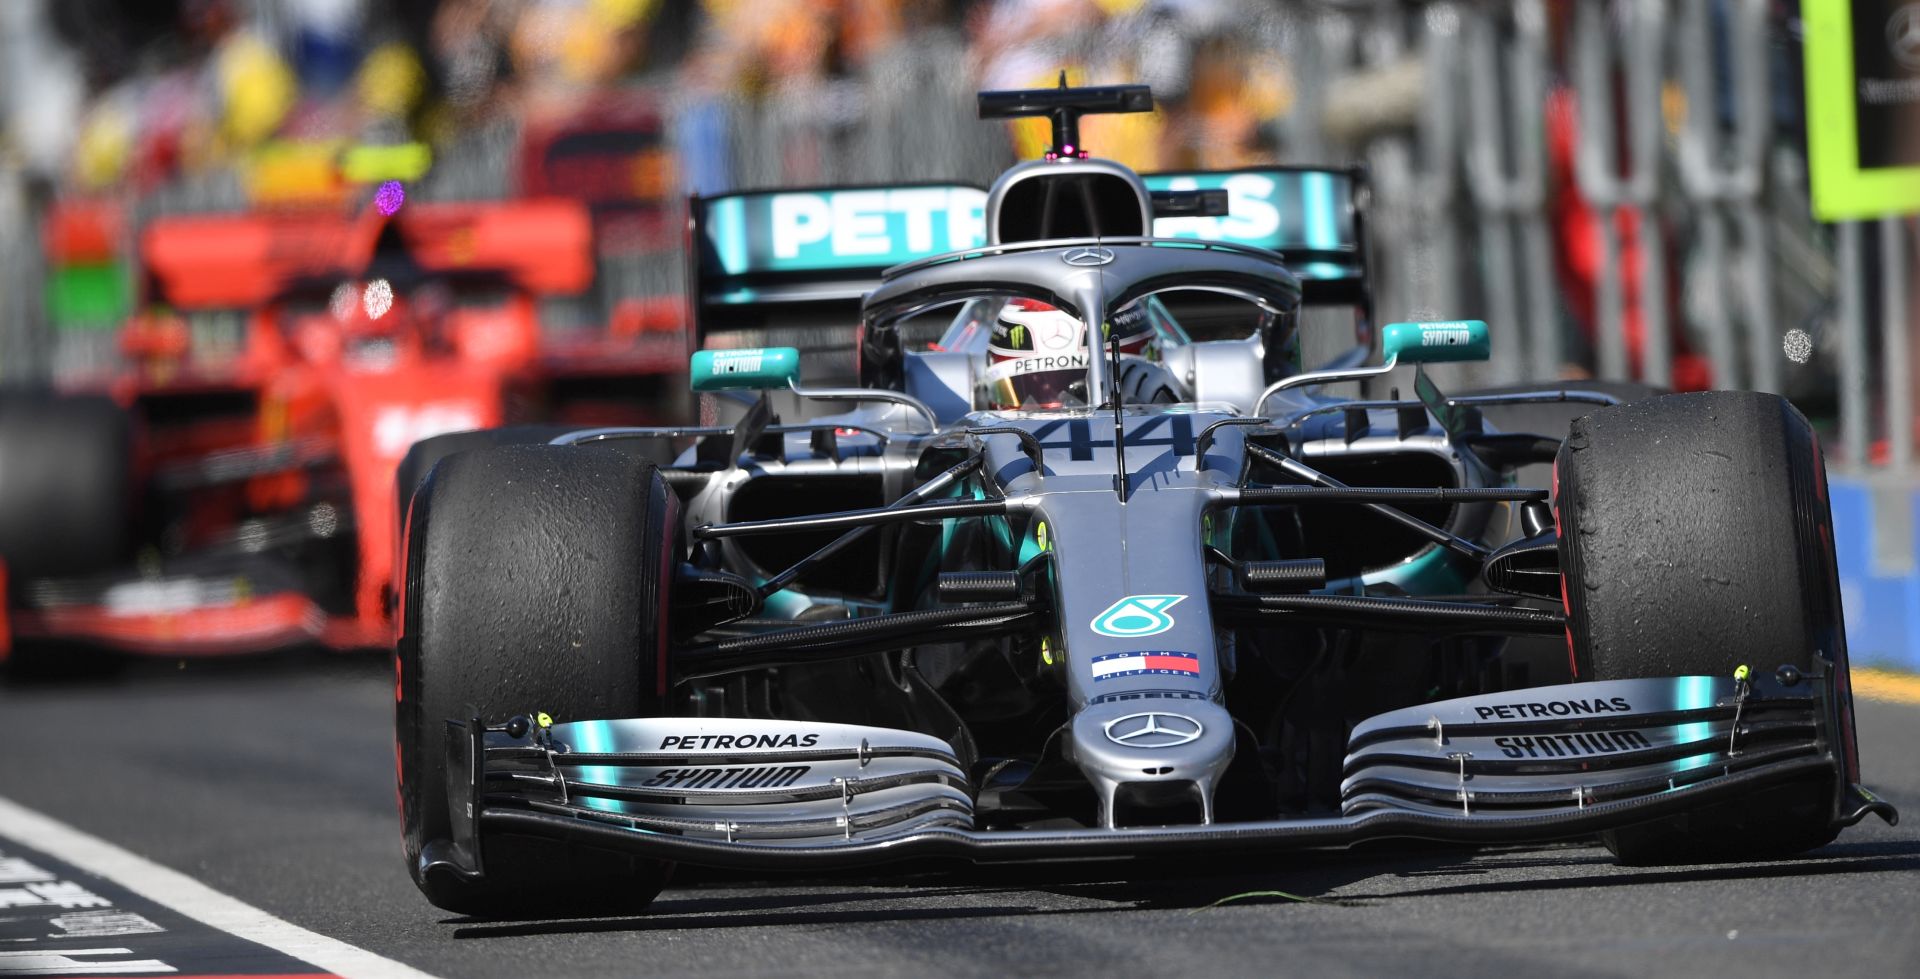 epa07438240 Lewis Hamilton of Britain drives his Mercedes-AMG into the garage during the first practice session during the Formula 1 2019 Australian Grand Prix at the Albert Park Grand Prix Circuit in Melbourne, Australia, 15 March 2019. The 2019 Formula One Grand Prix of Australia will take place on 17 March 2019.  EPA/JULIAN SMITH AUSTRALIA AND NEW ZEALAND OUT